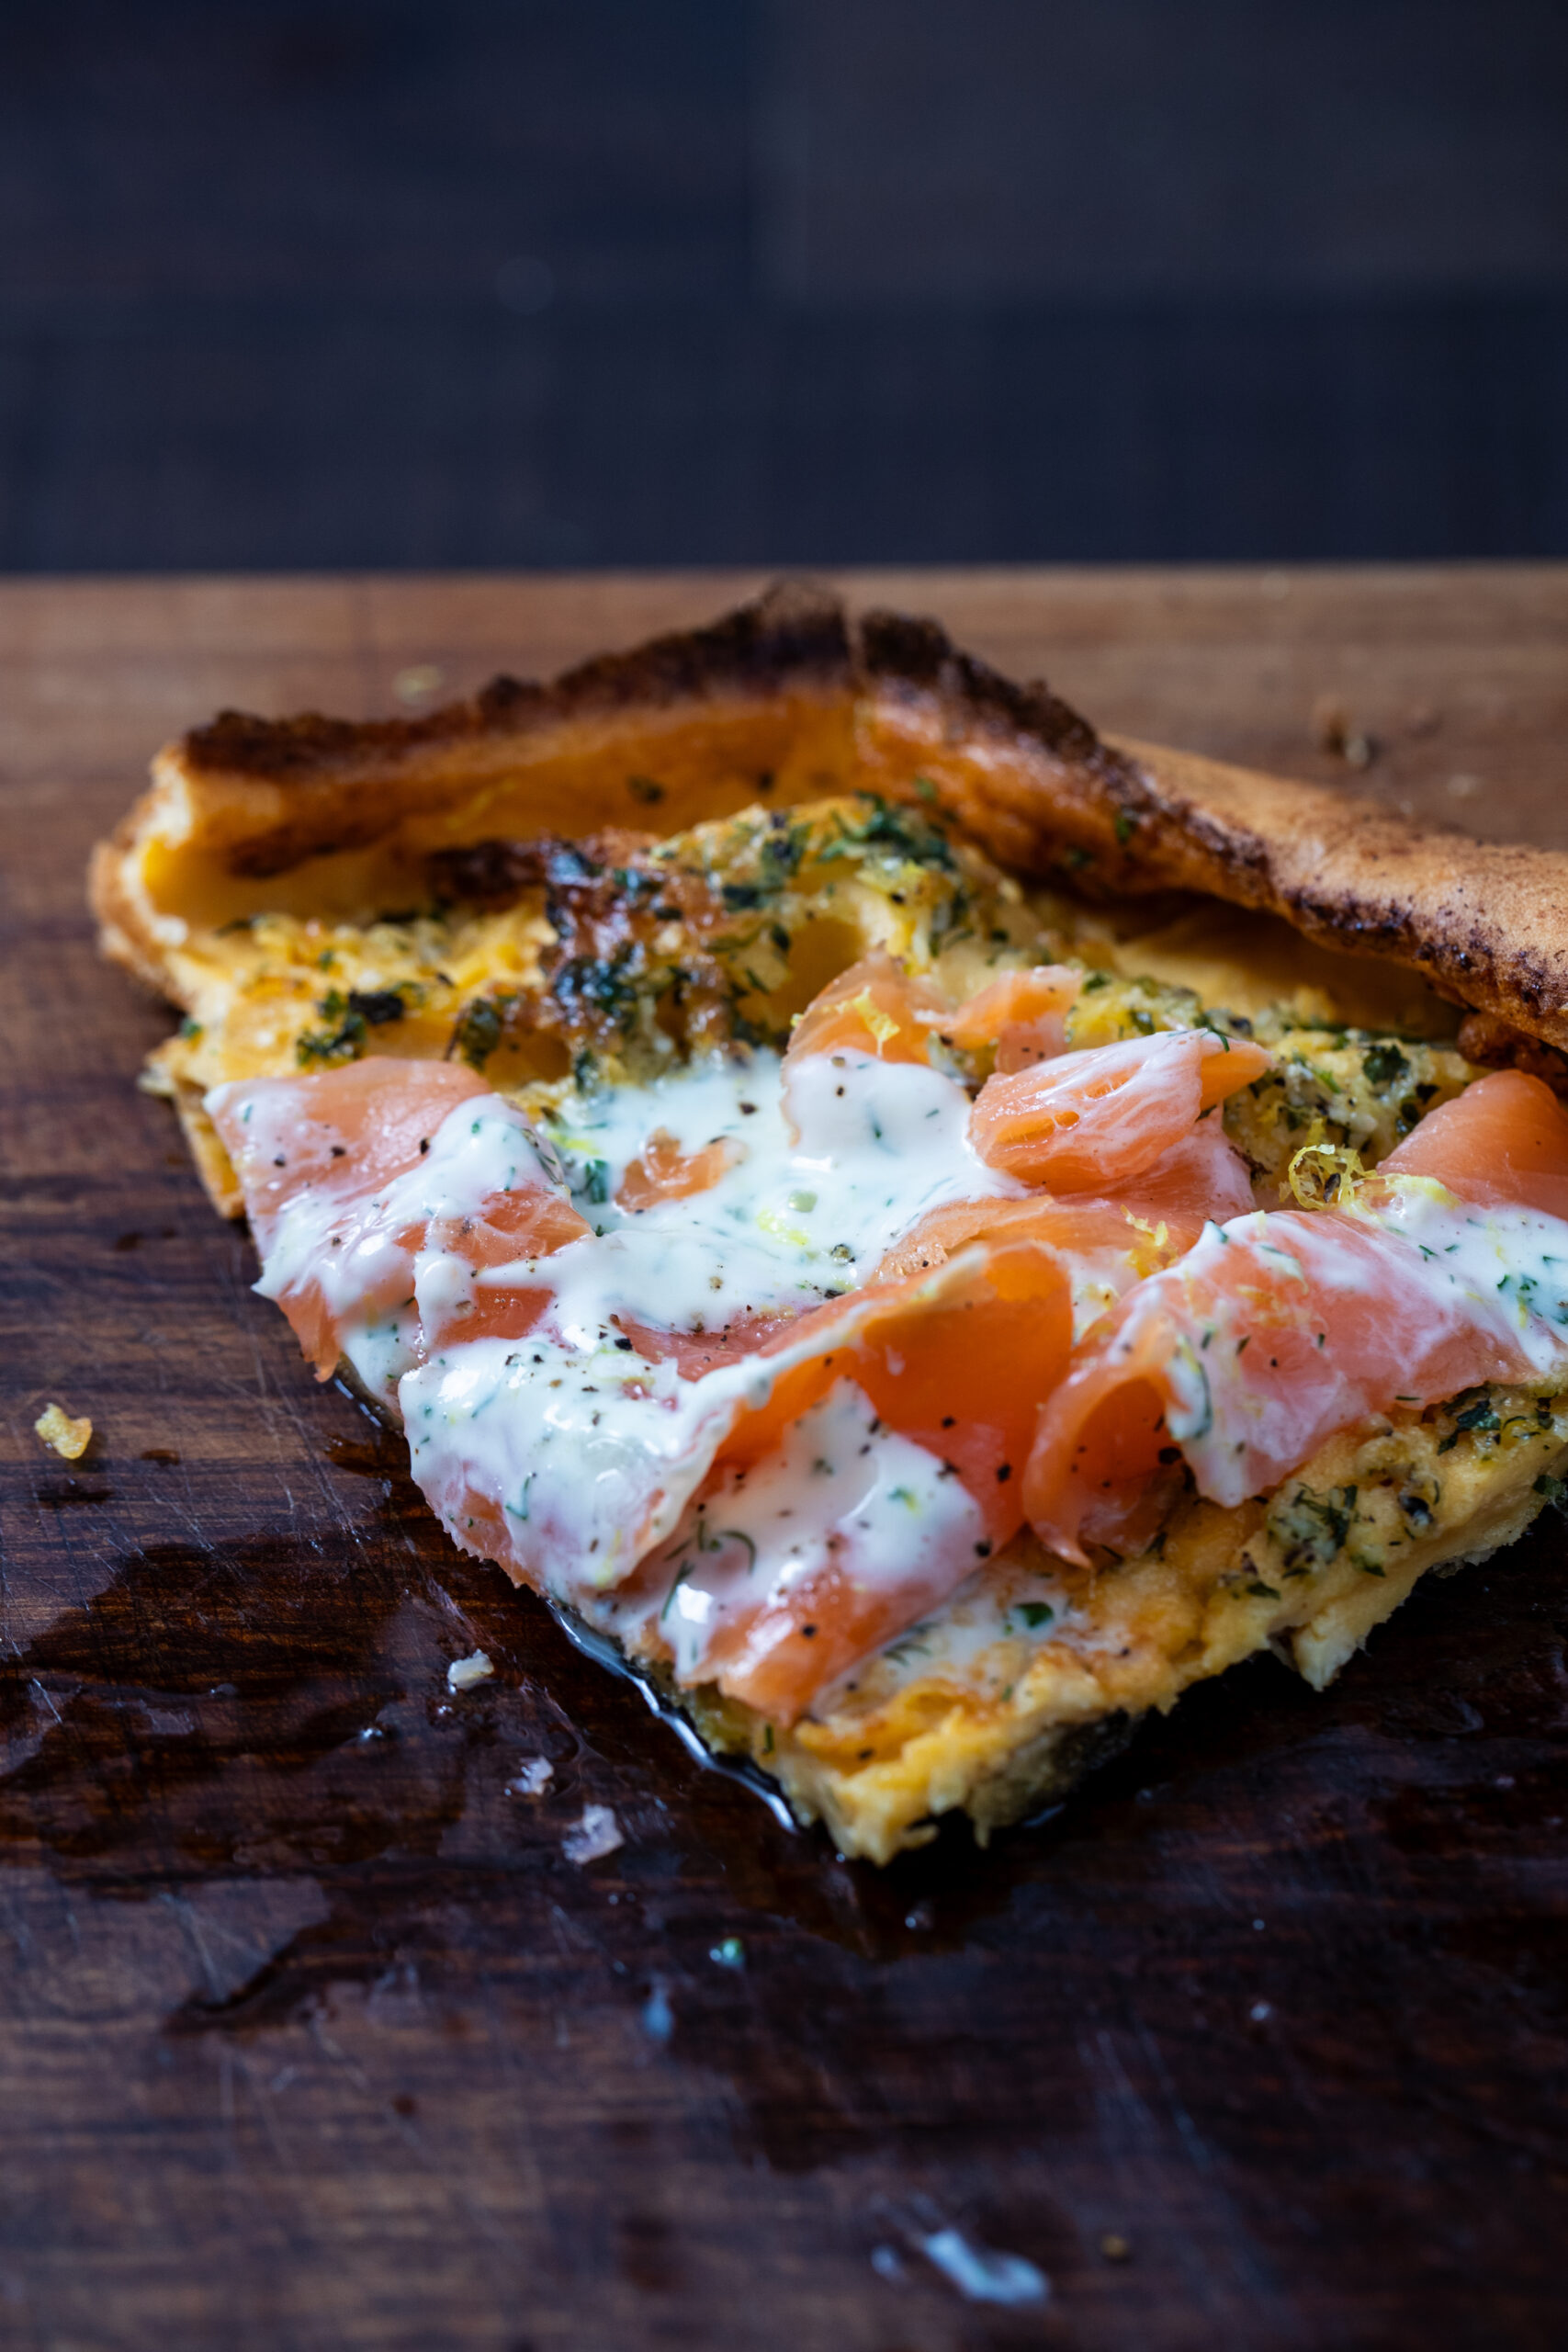 1/4 slice of a savoury dutch baby top with smoked salmon and crème fraîche